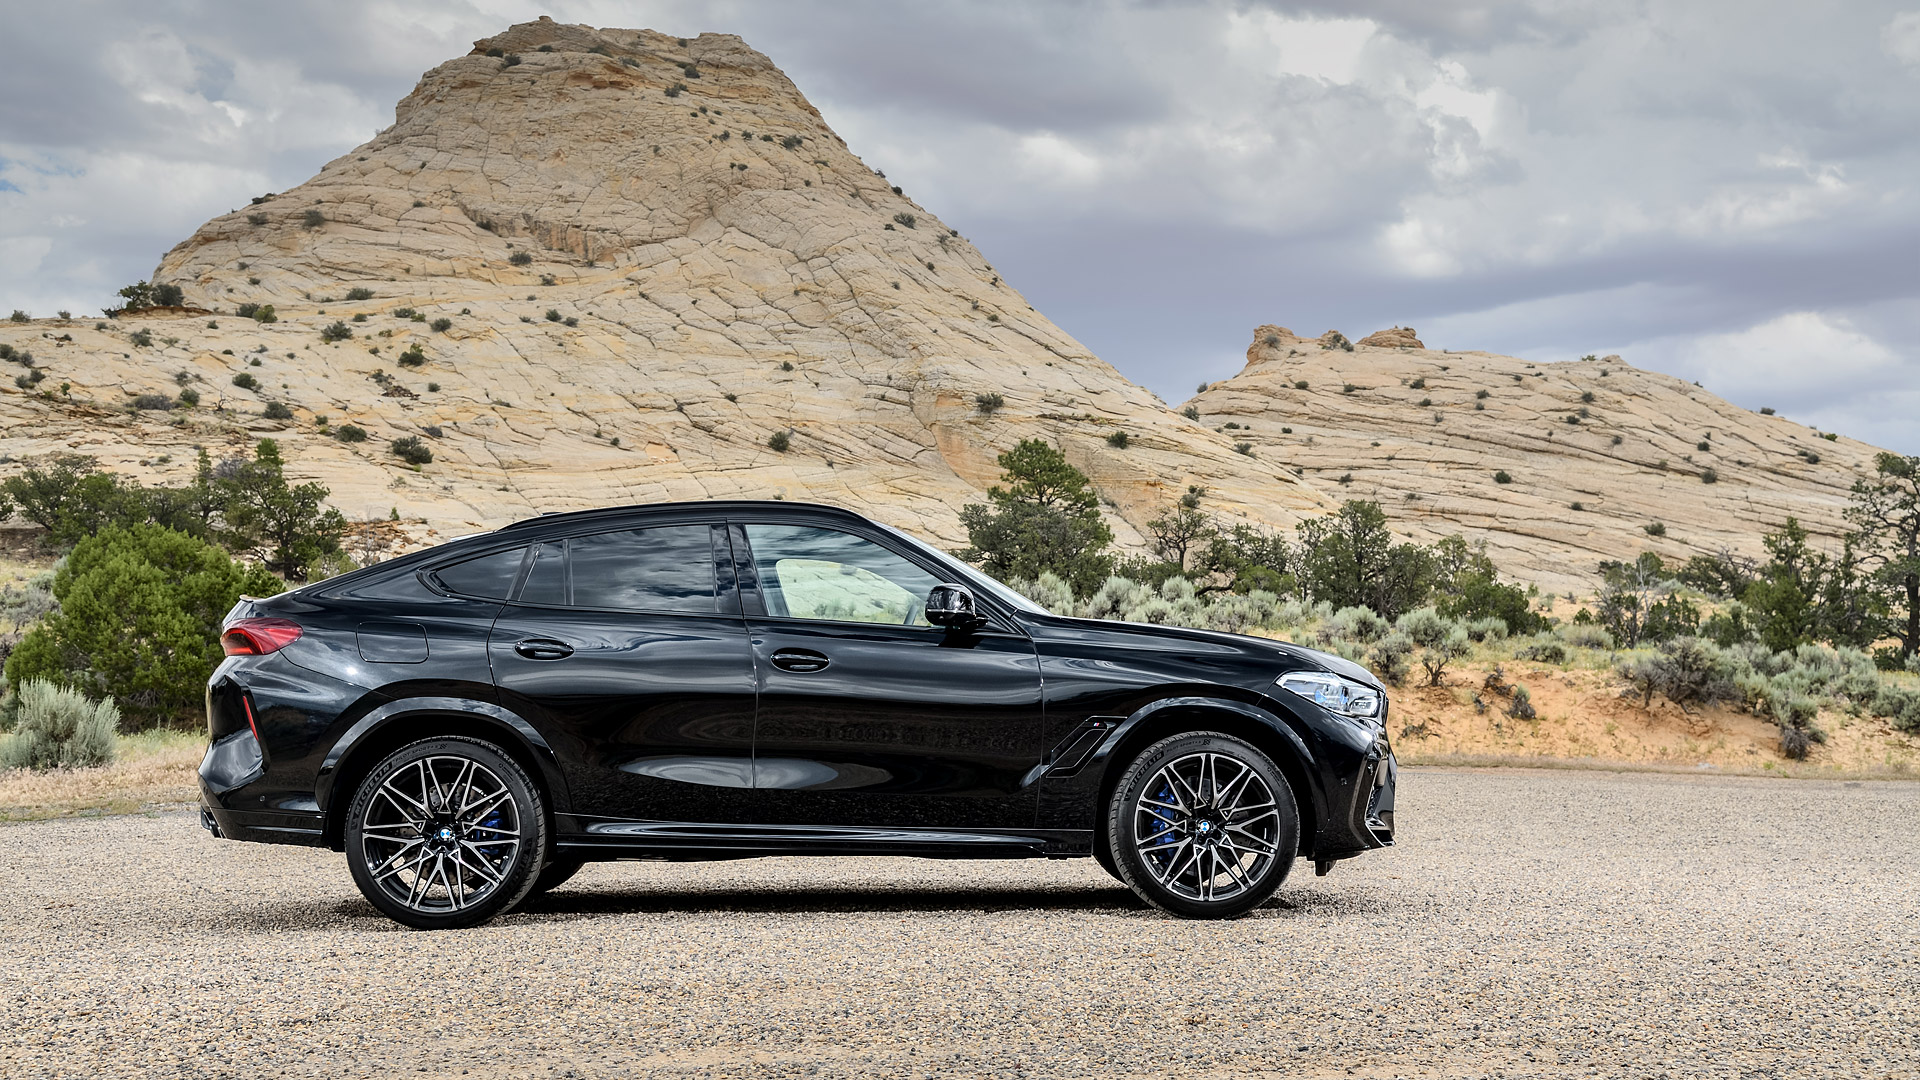  2020 BMW X6 M Competition Wallpaper.